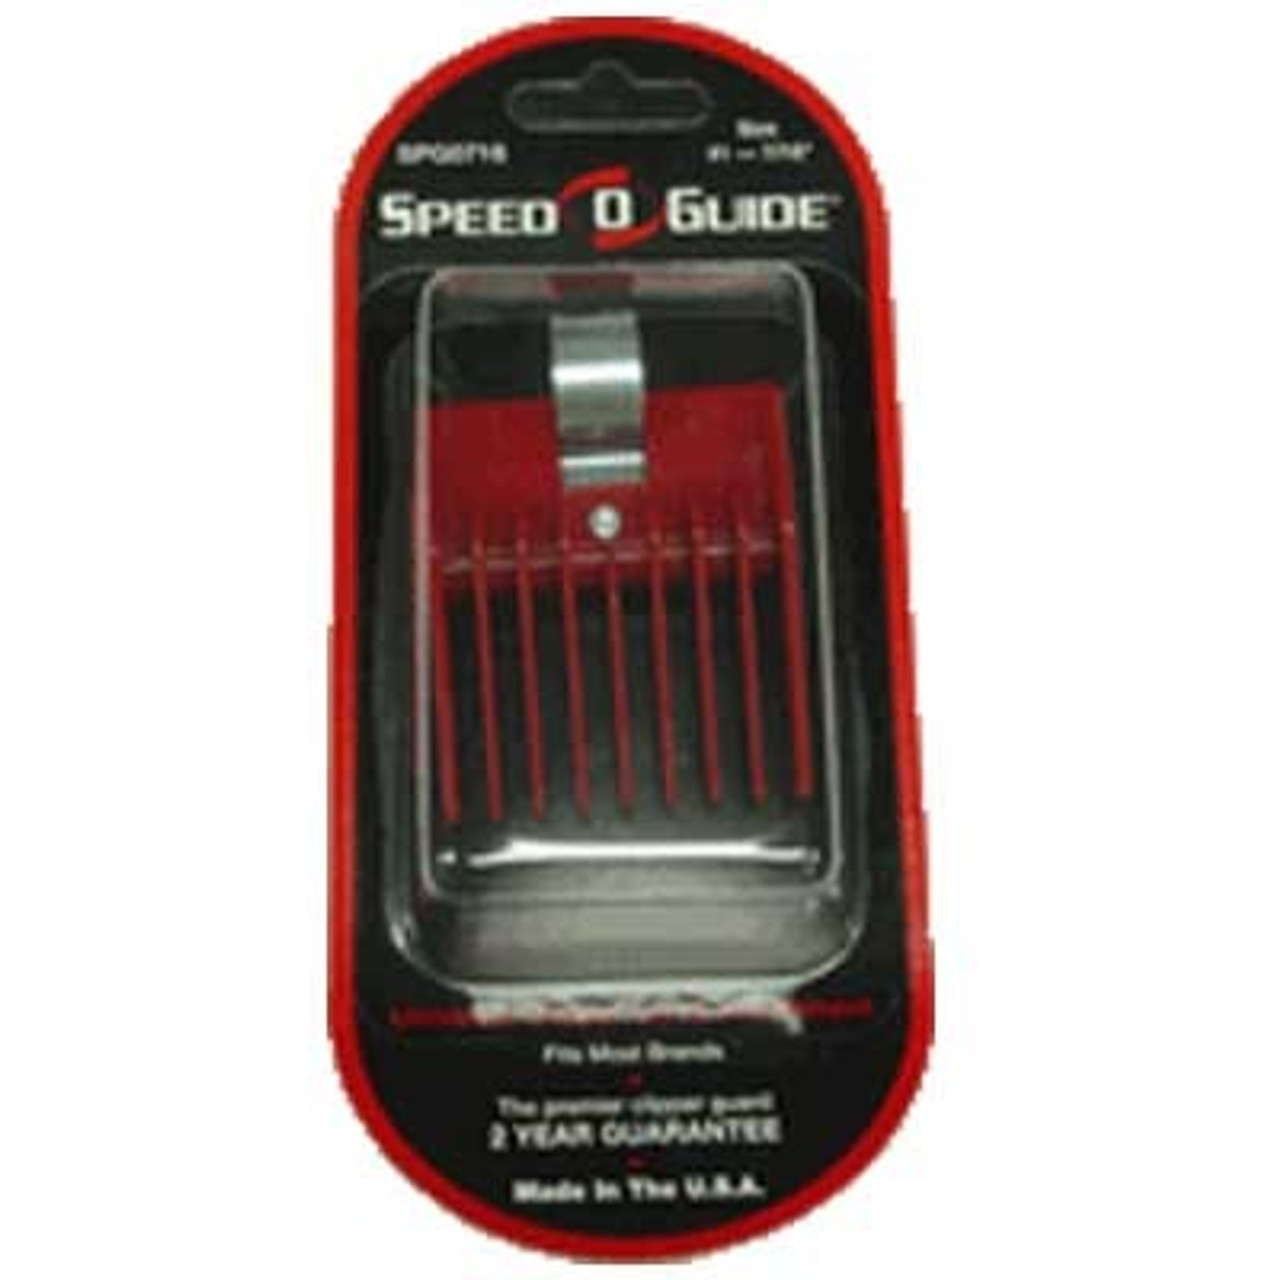 speed o guide guards